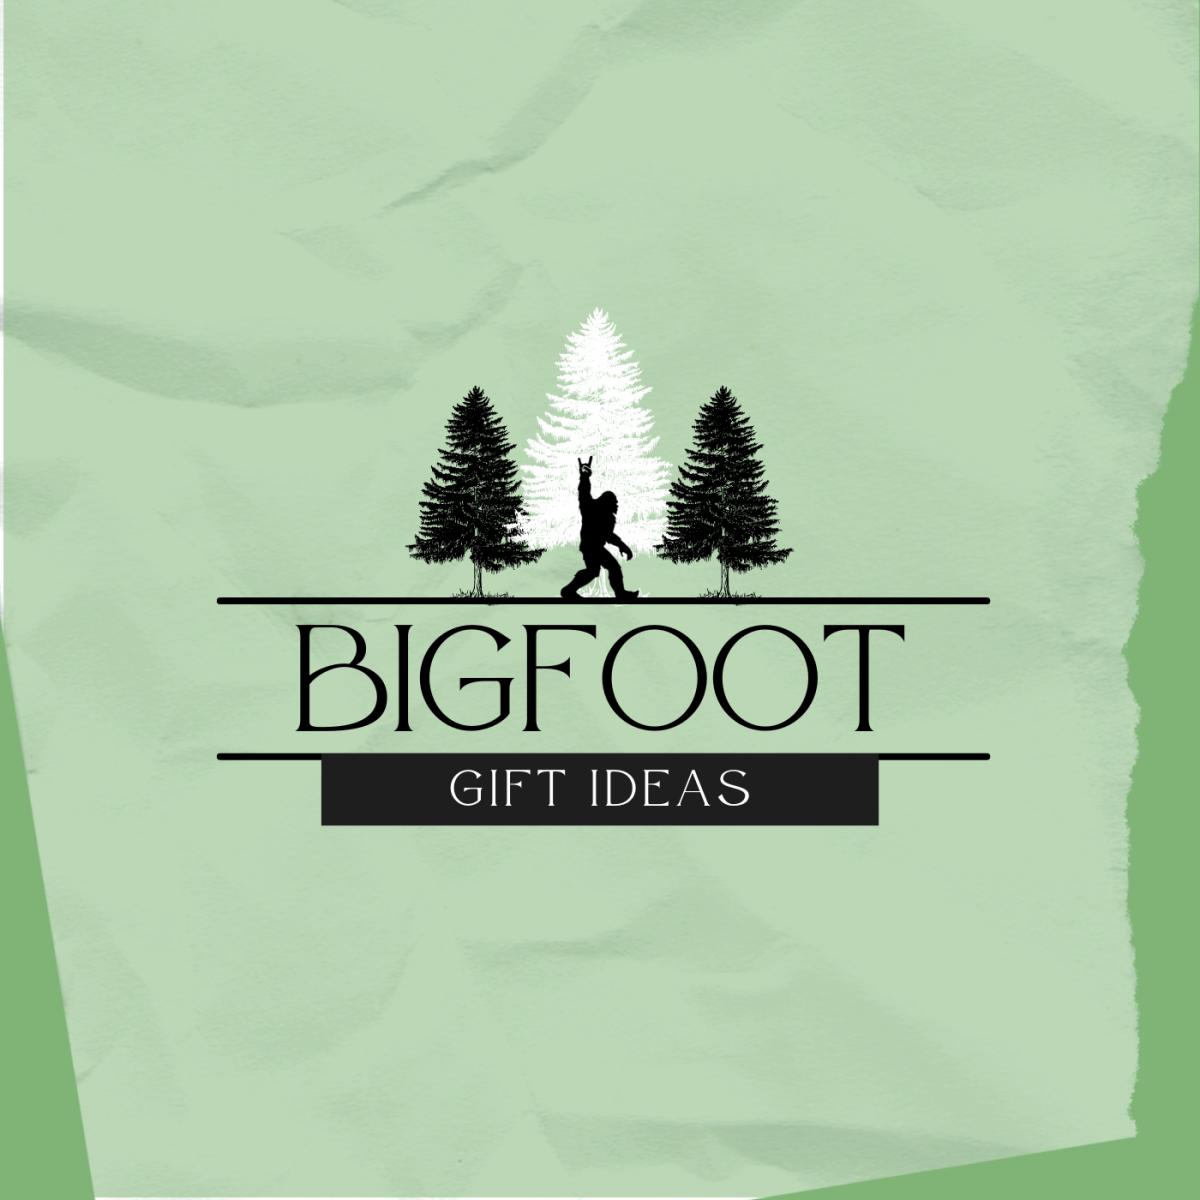 10 Fun Gifts for Bigfoot Enthusiasts and Fans of Sasquatch